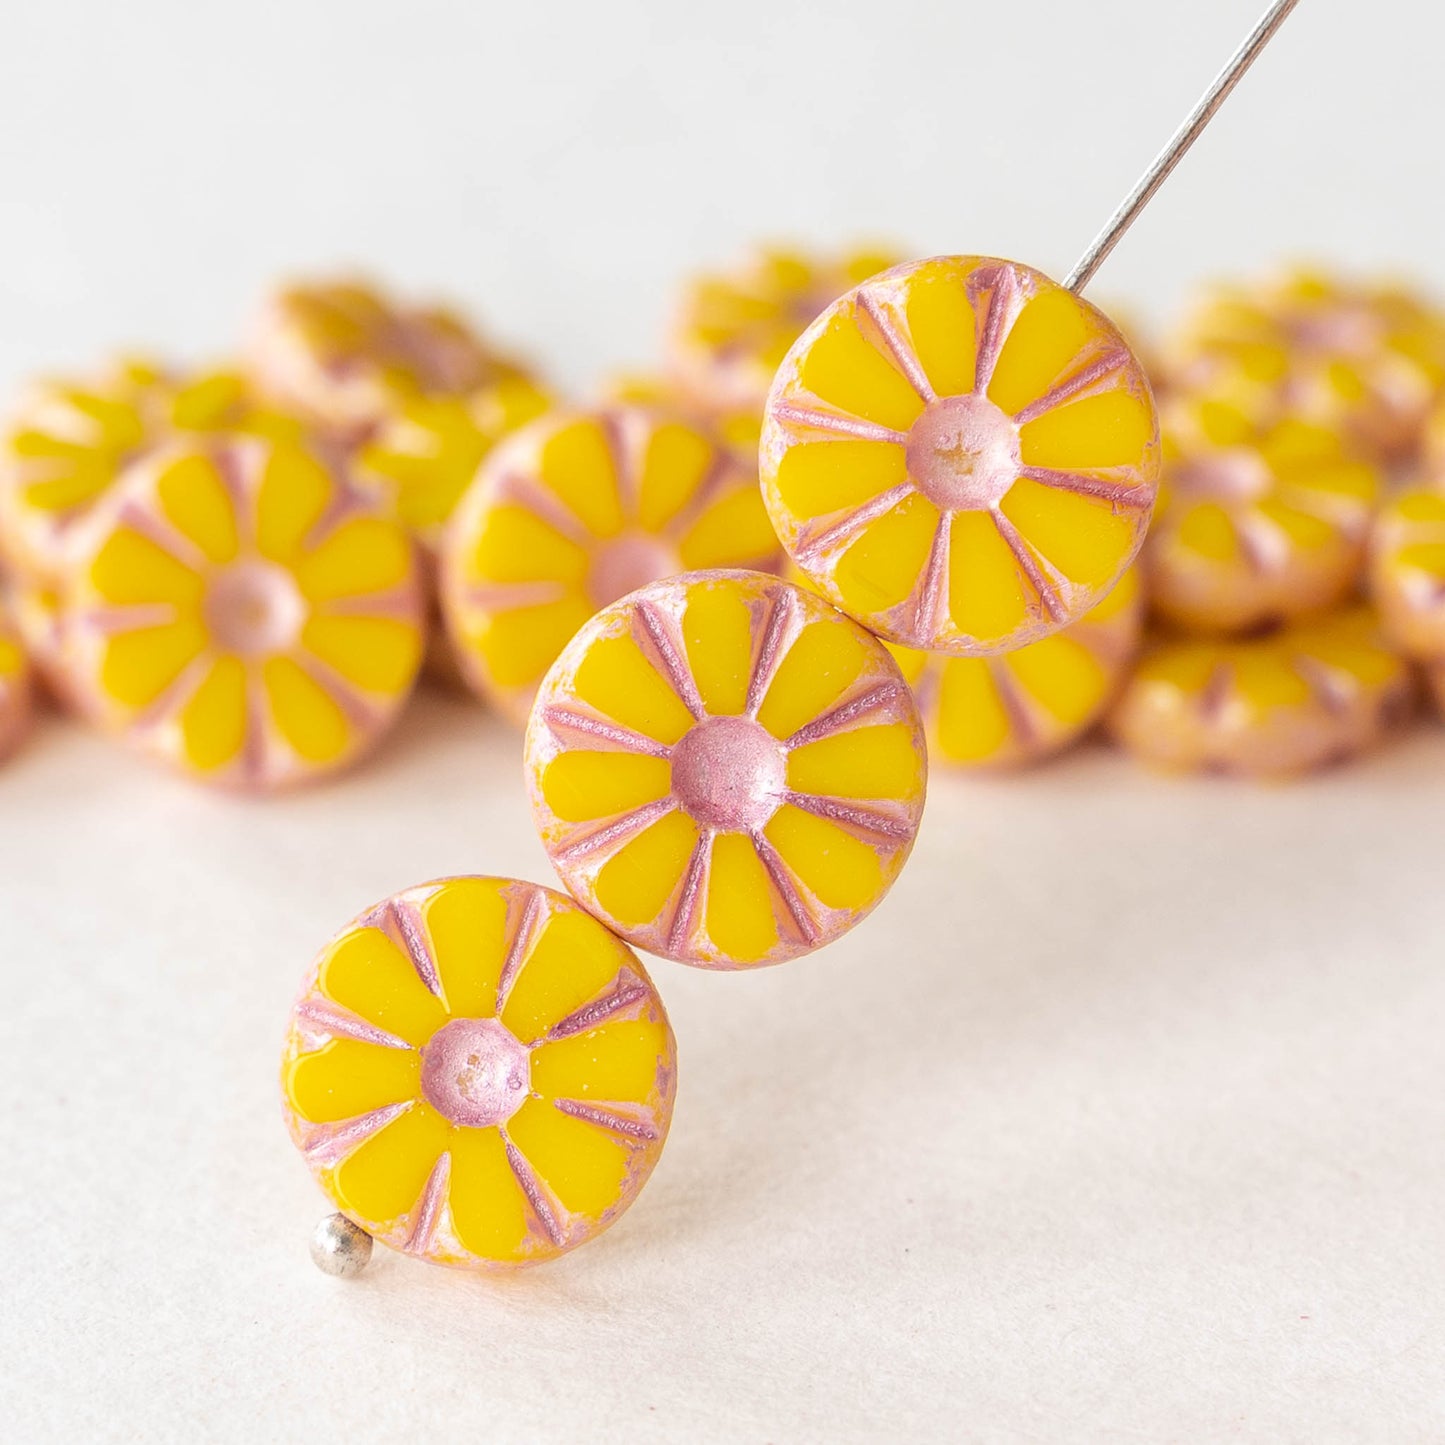 12mm Flower Coin Beads - Yellow with Pink Wash - 10